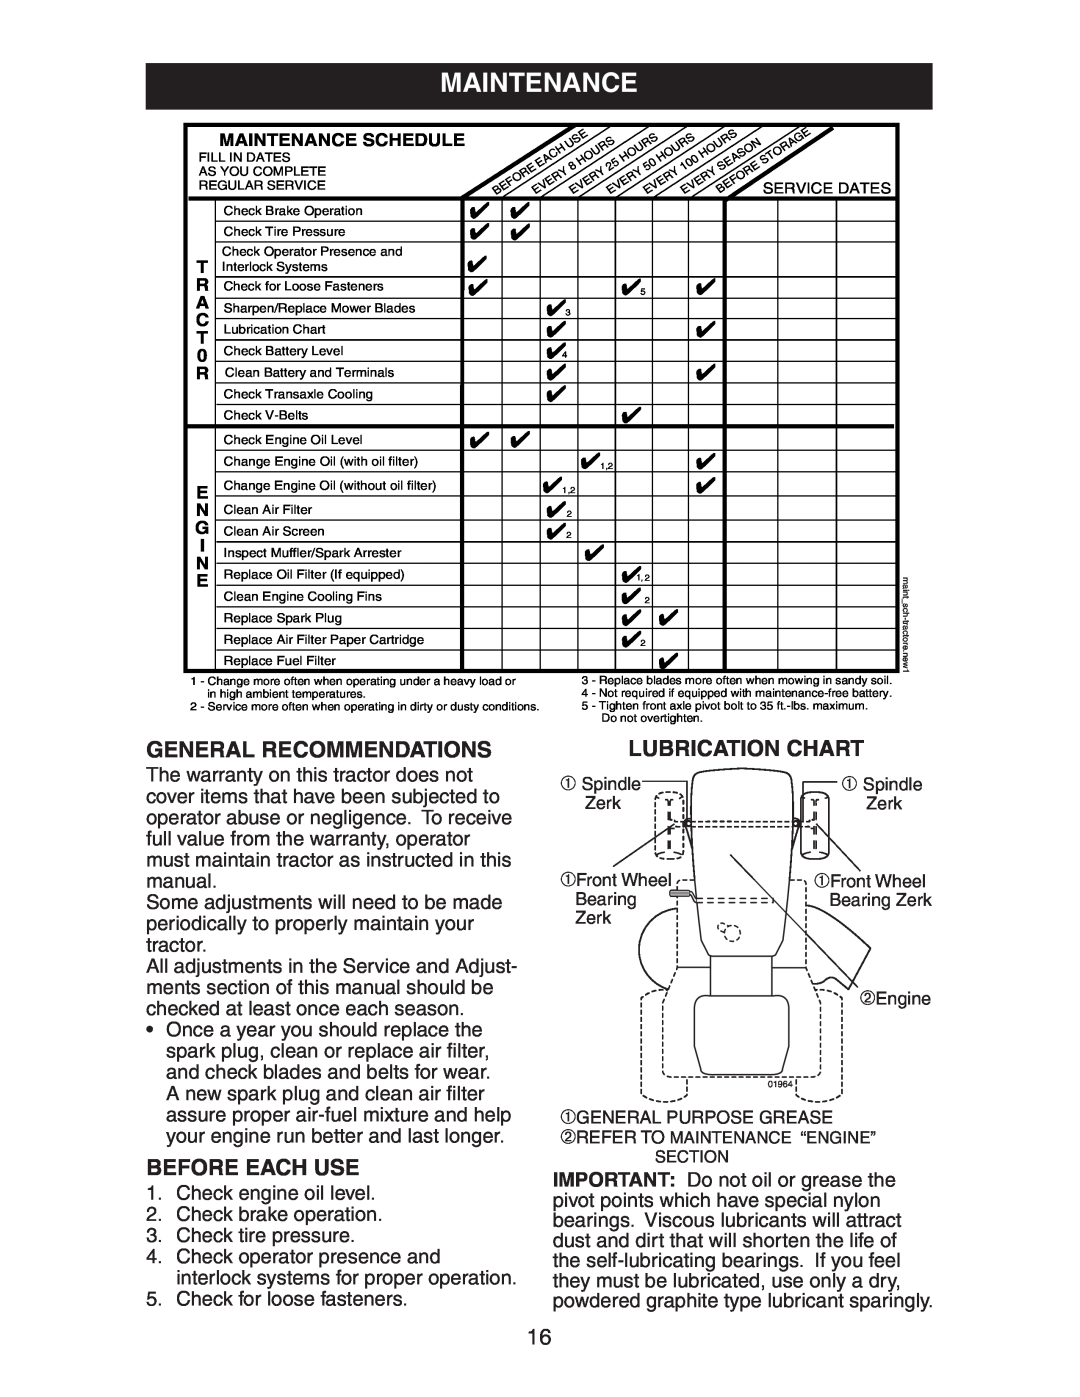 Poulan 271491 manual Maintenance, General Recommendations, Lubrication Chart, Before Each Use 